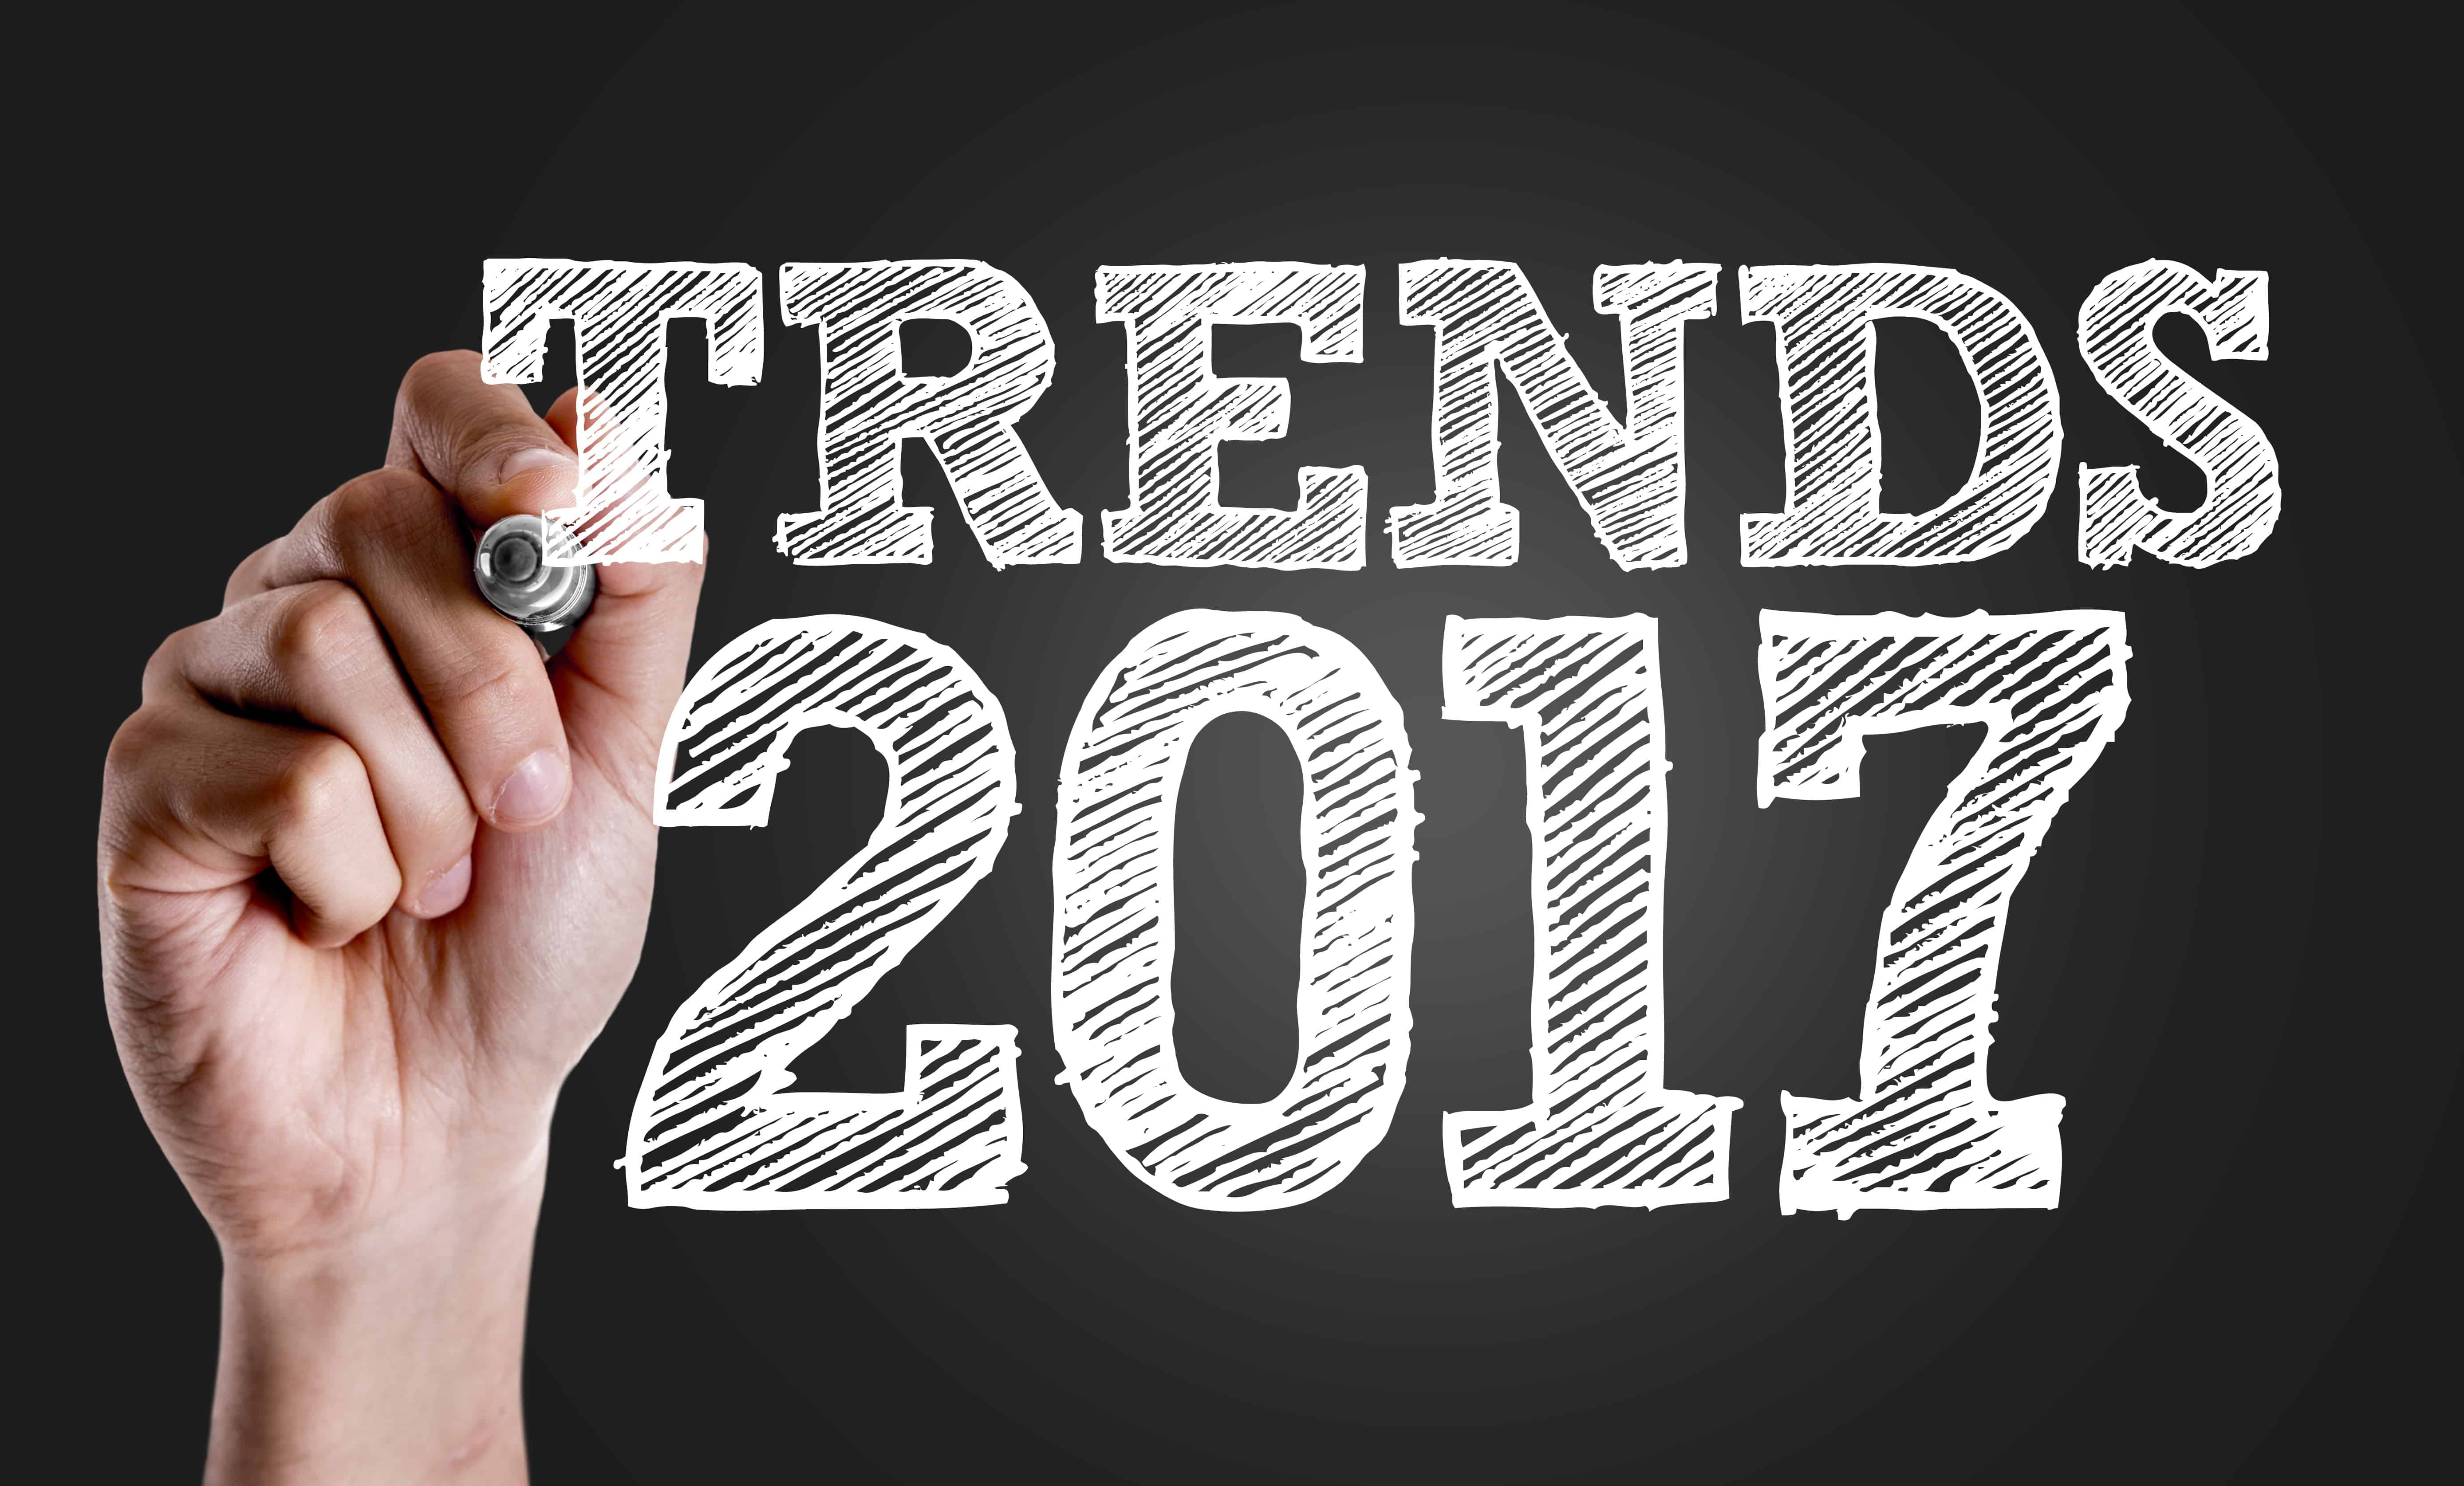 Hand writing the text: Trends 2017